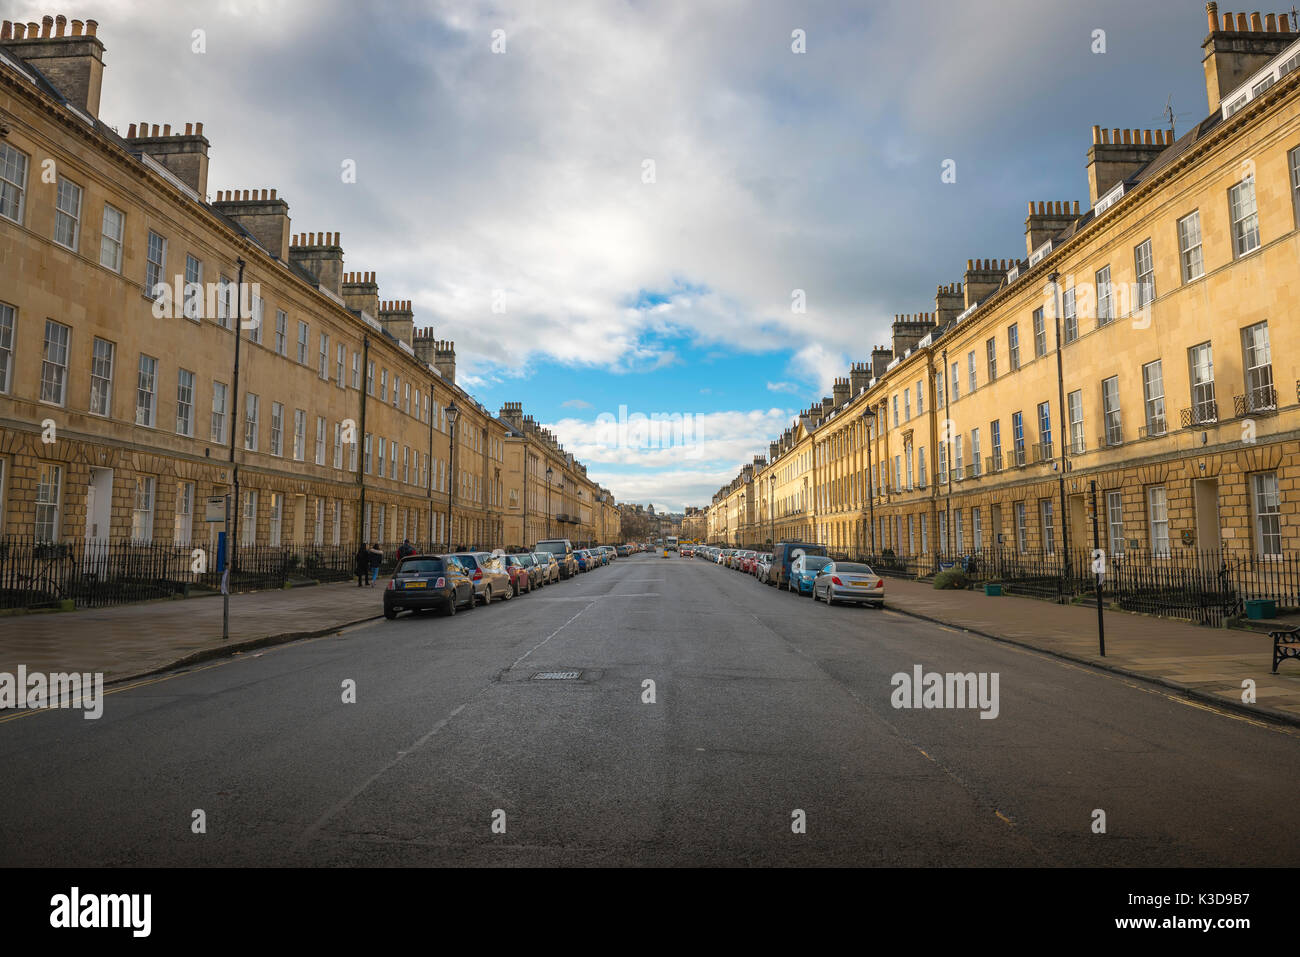 Great Pulteney Street Bath UK, view of Great Pulteney Street, containing a double row of some of the finest domestic Georgian property in England. Stock Photo